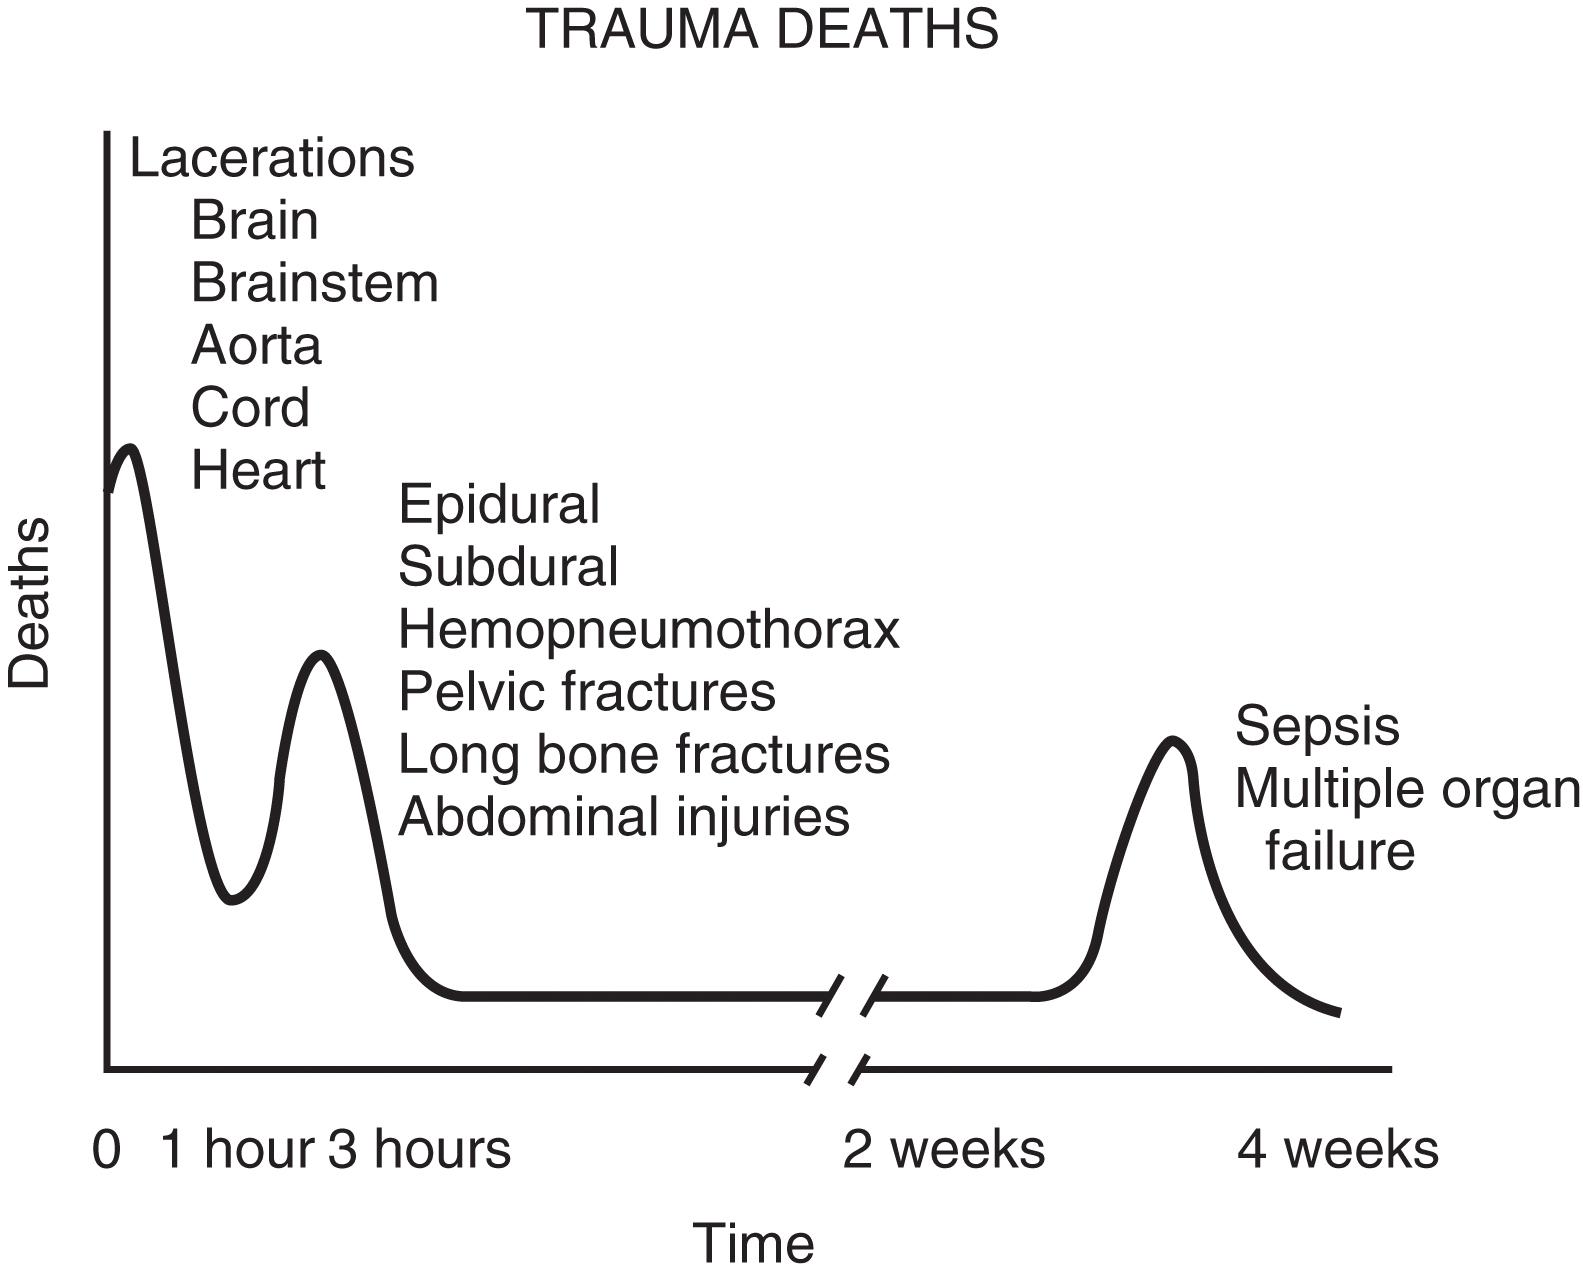 FIGURE 1, Trauma deaths have a trimodal distribution. The first death peak (approximately 50%) is within minutes of the injury. The second death peak (approximately 30%) occurs within a few hours to 48 hours. The third death peak (approximately 15%) occurs within 1 to 4 weeks and represents those patients who die from the complications of their injury or treatment. From a public health perspective, the first death peak can be addressed only by prevention, which is difficult, because part of this strategy means dealing with human behavior. The second death peak is best addressed by having a trauma system, and the third death peak requires critical care and research.